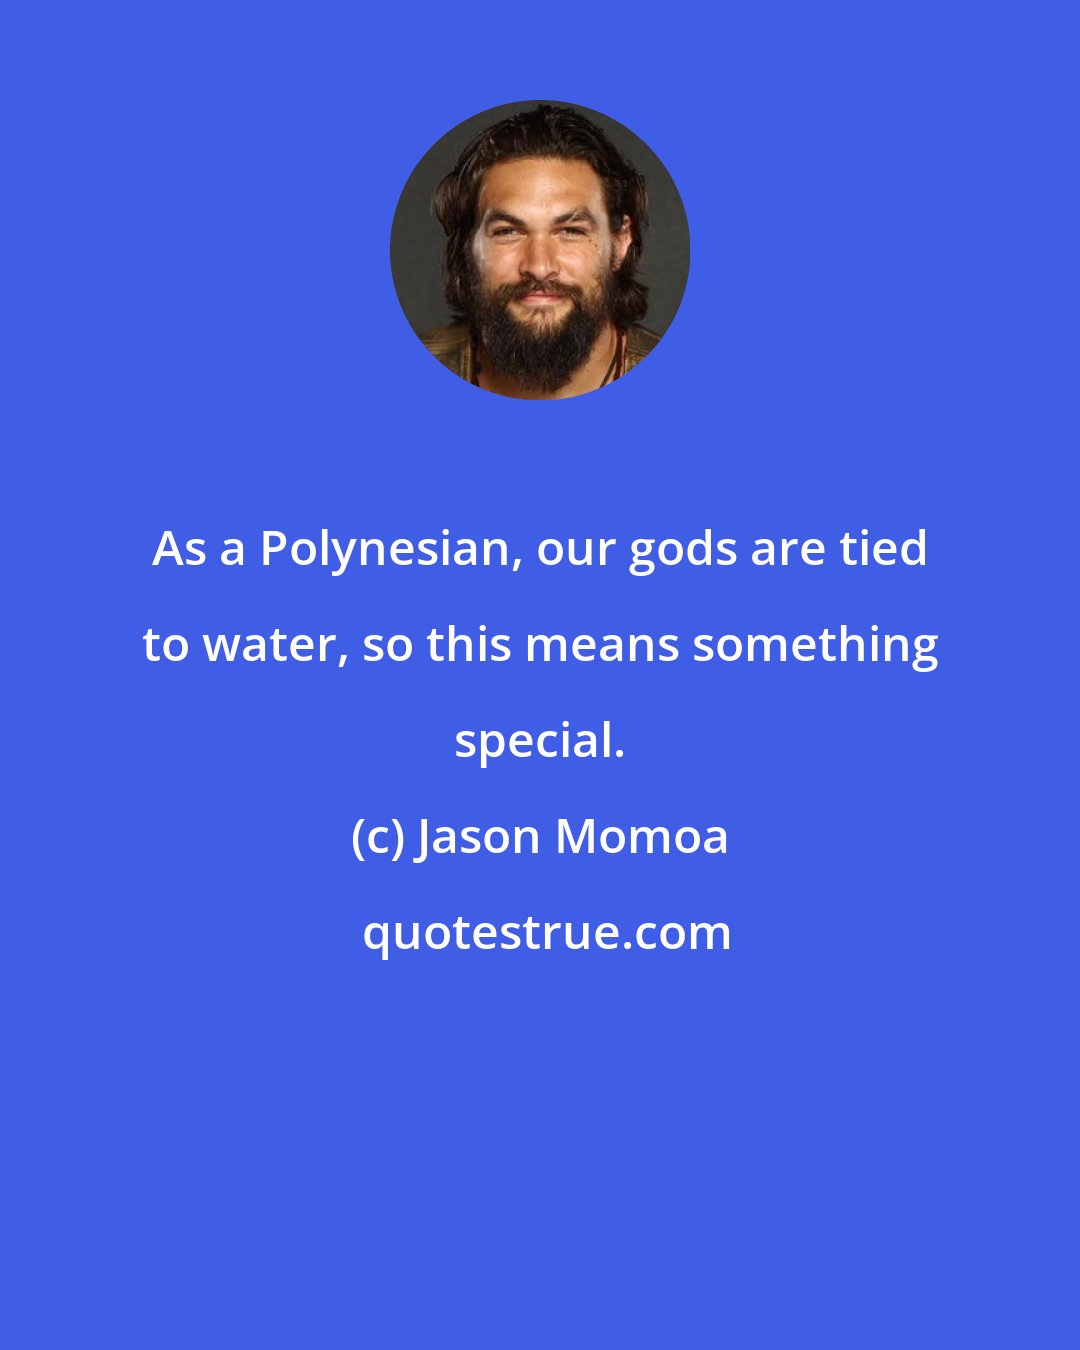 Jason Momoa: As a Polynesian, our gods are tied to water, so this means something special.